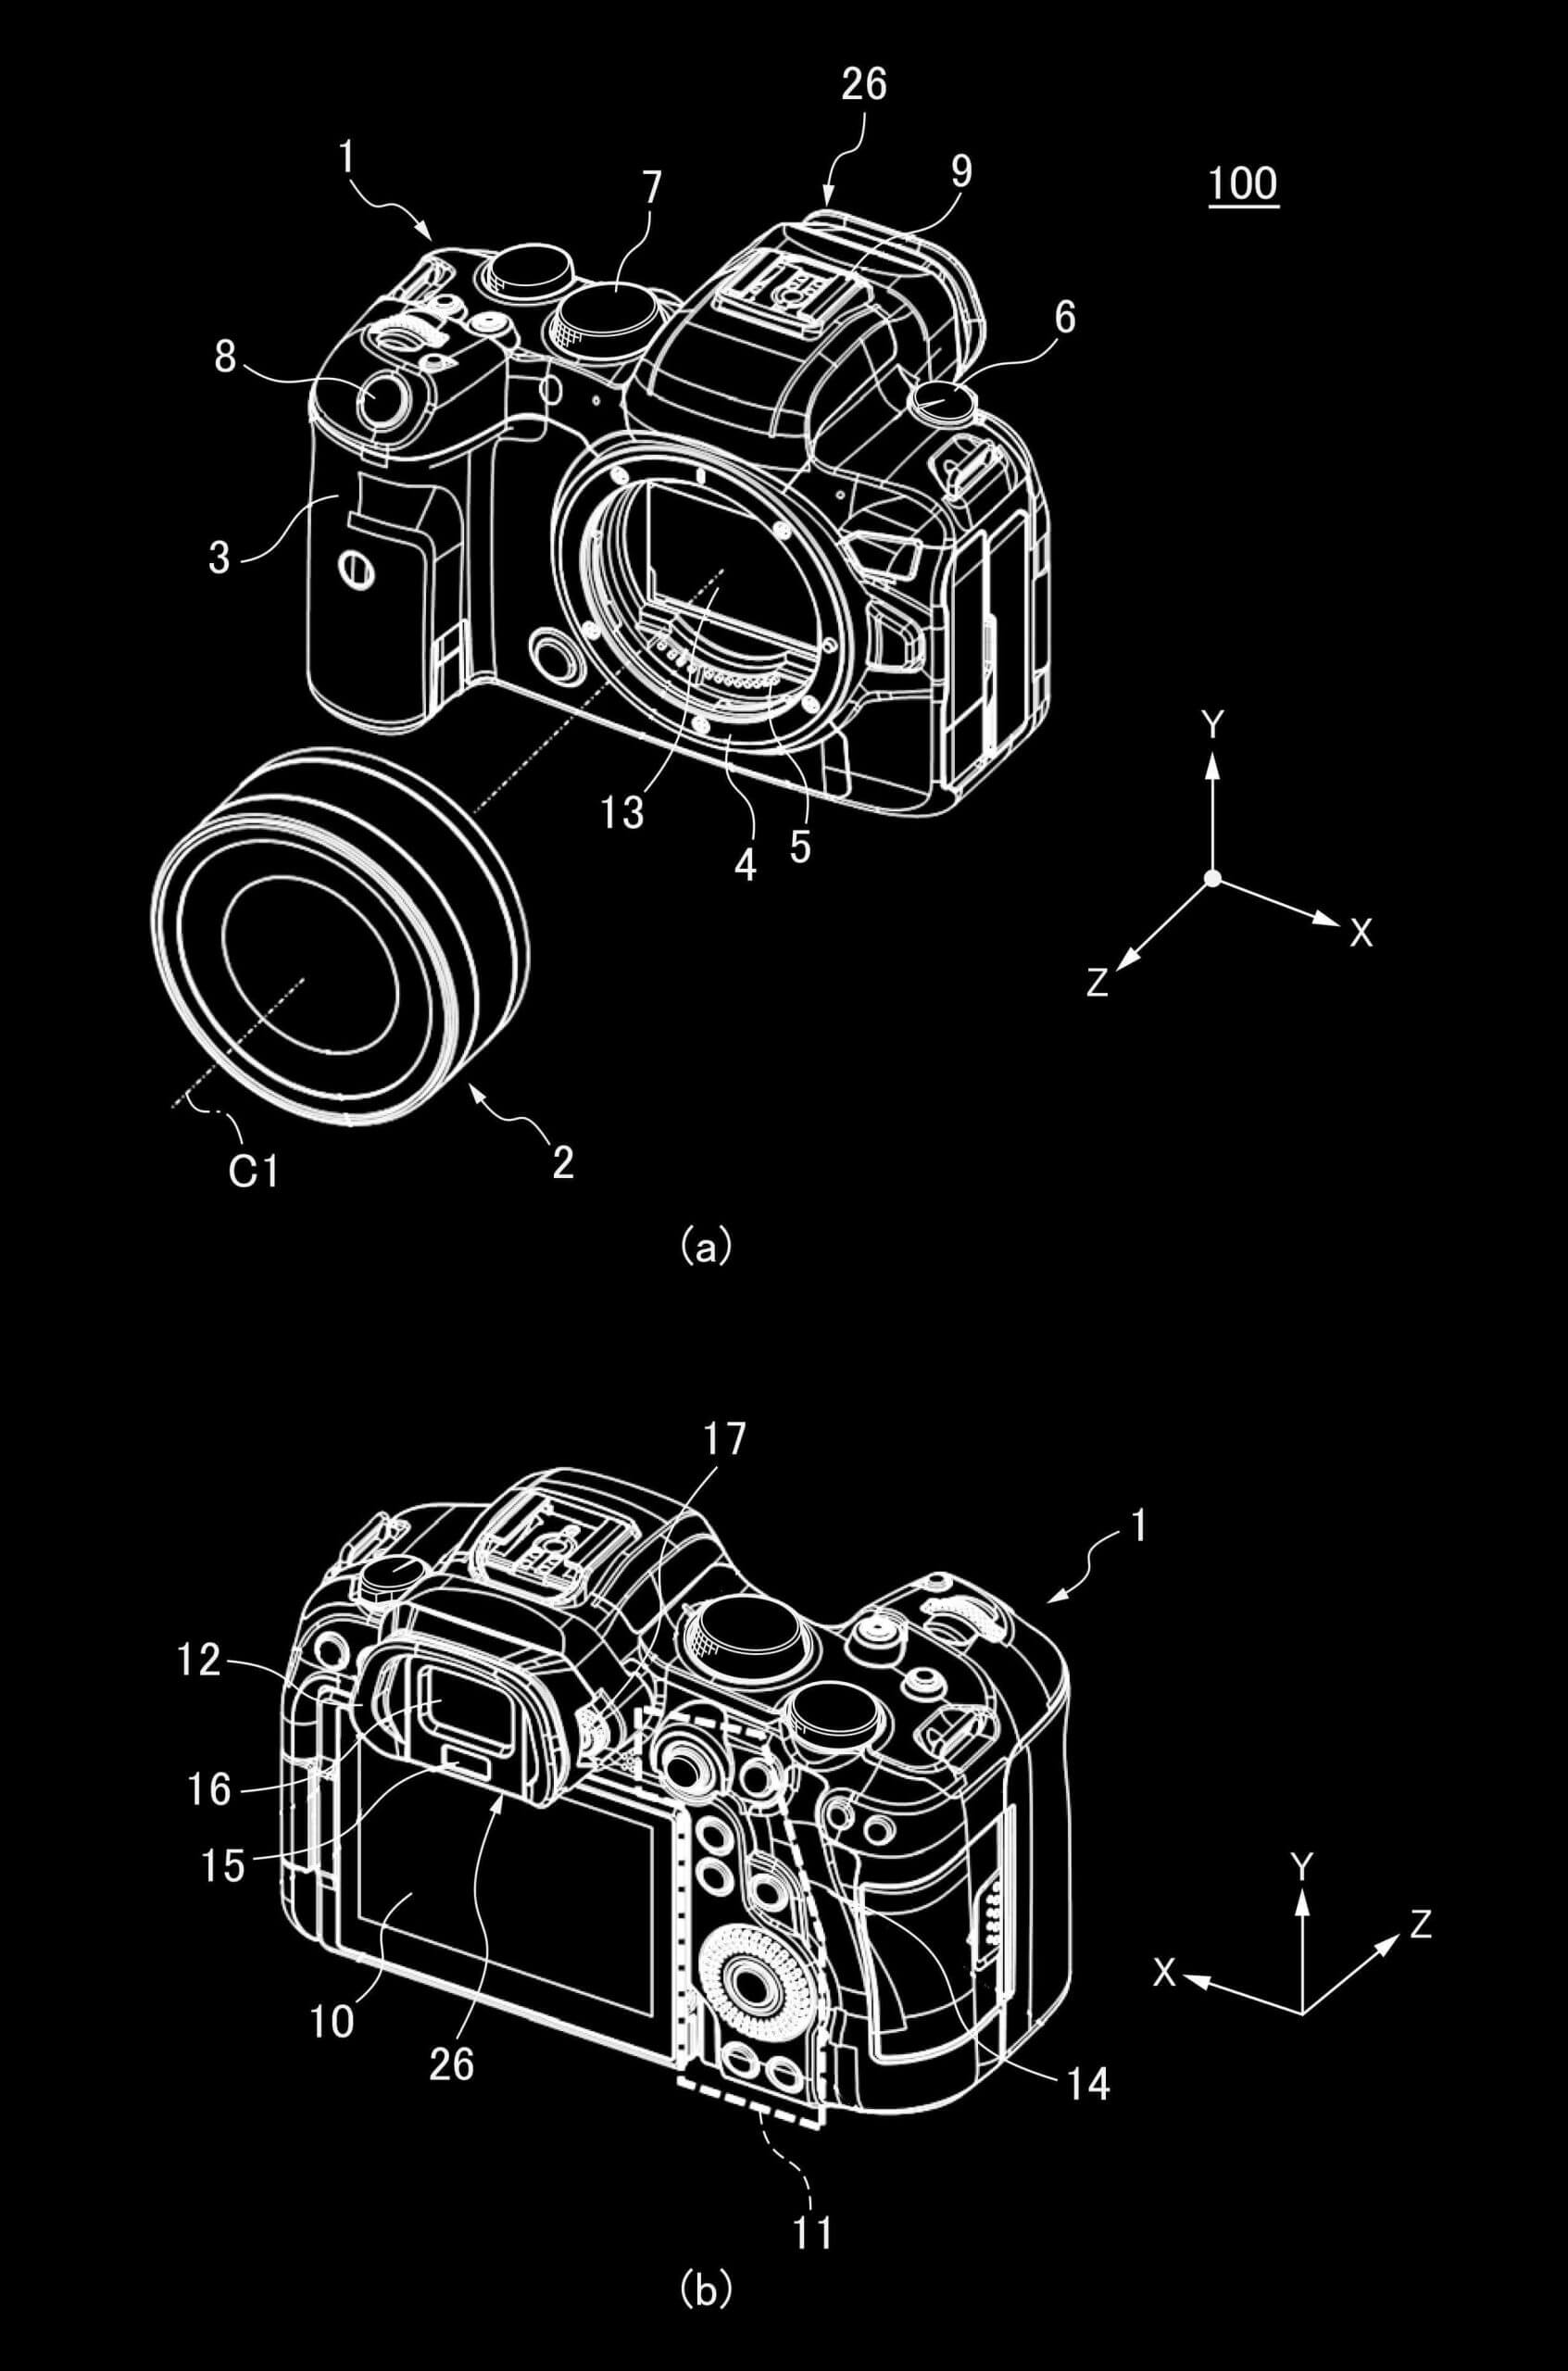 patentevftilt01 scaled - Canon patents a built-in tilting viewfinder